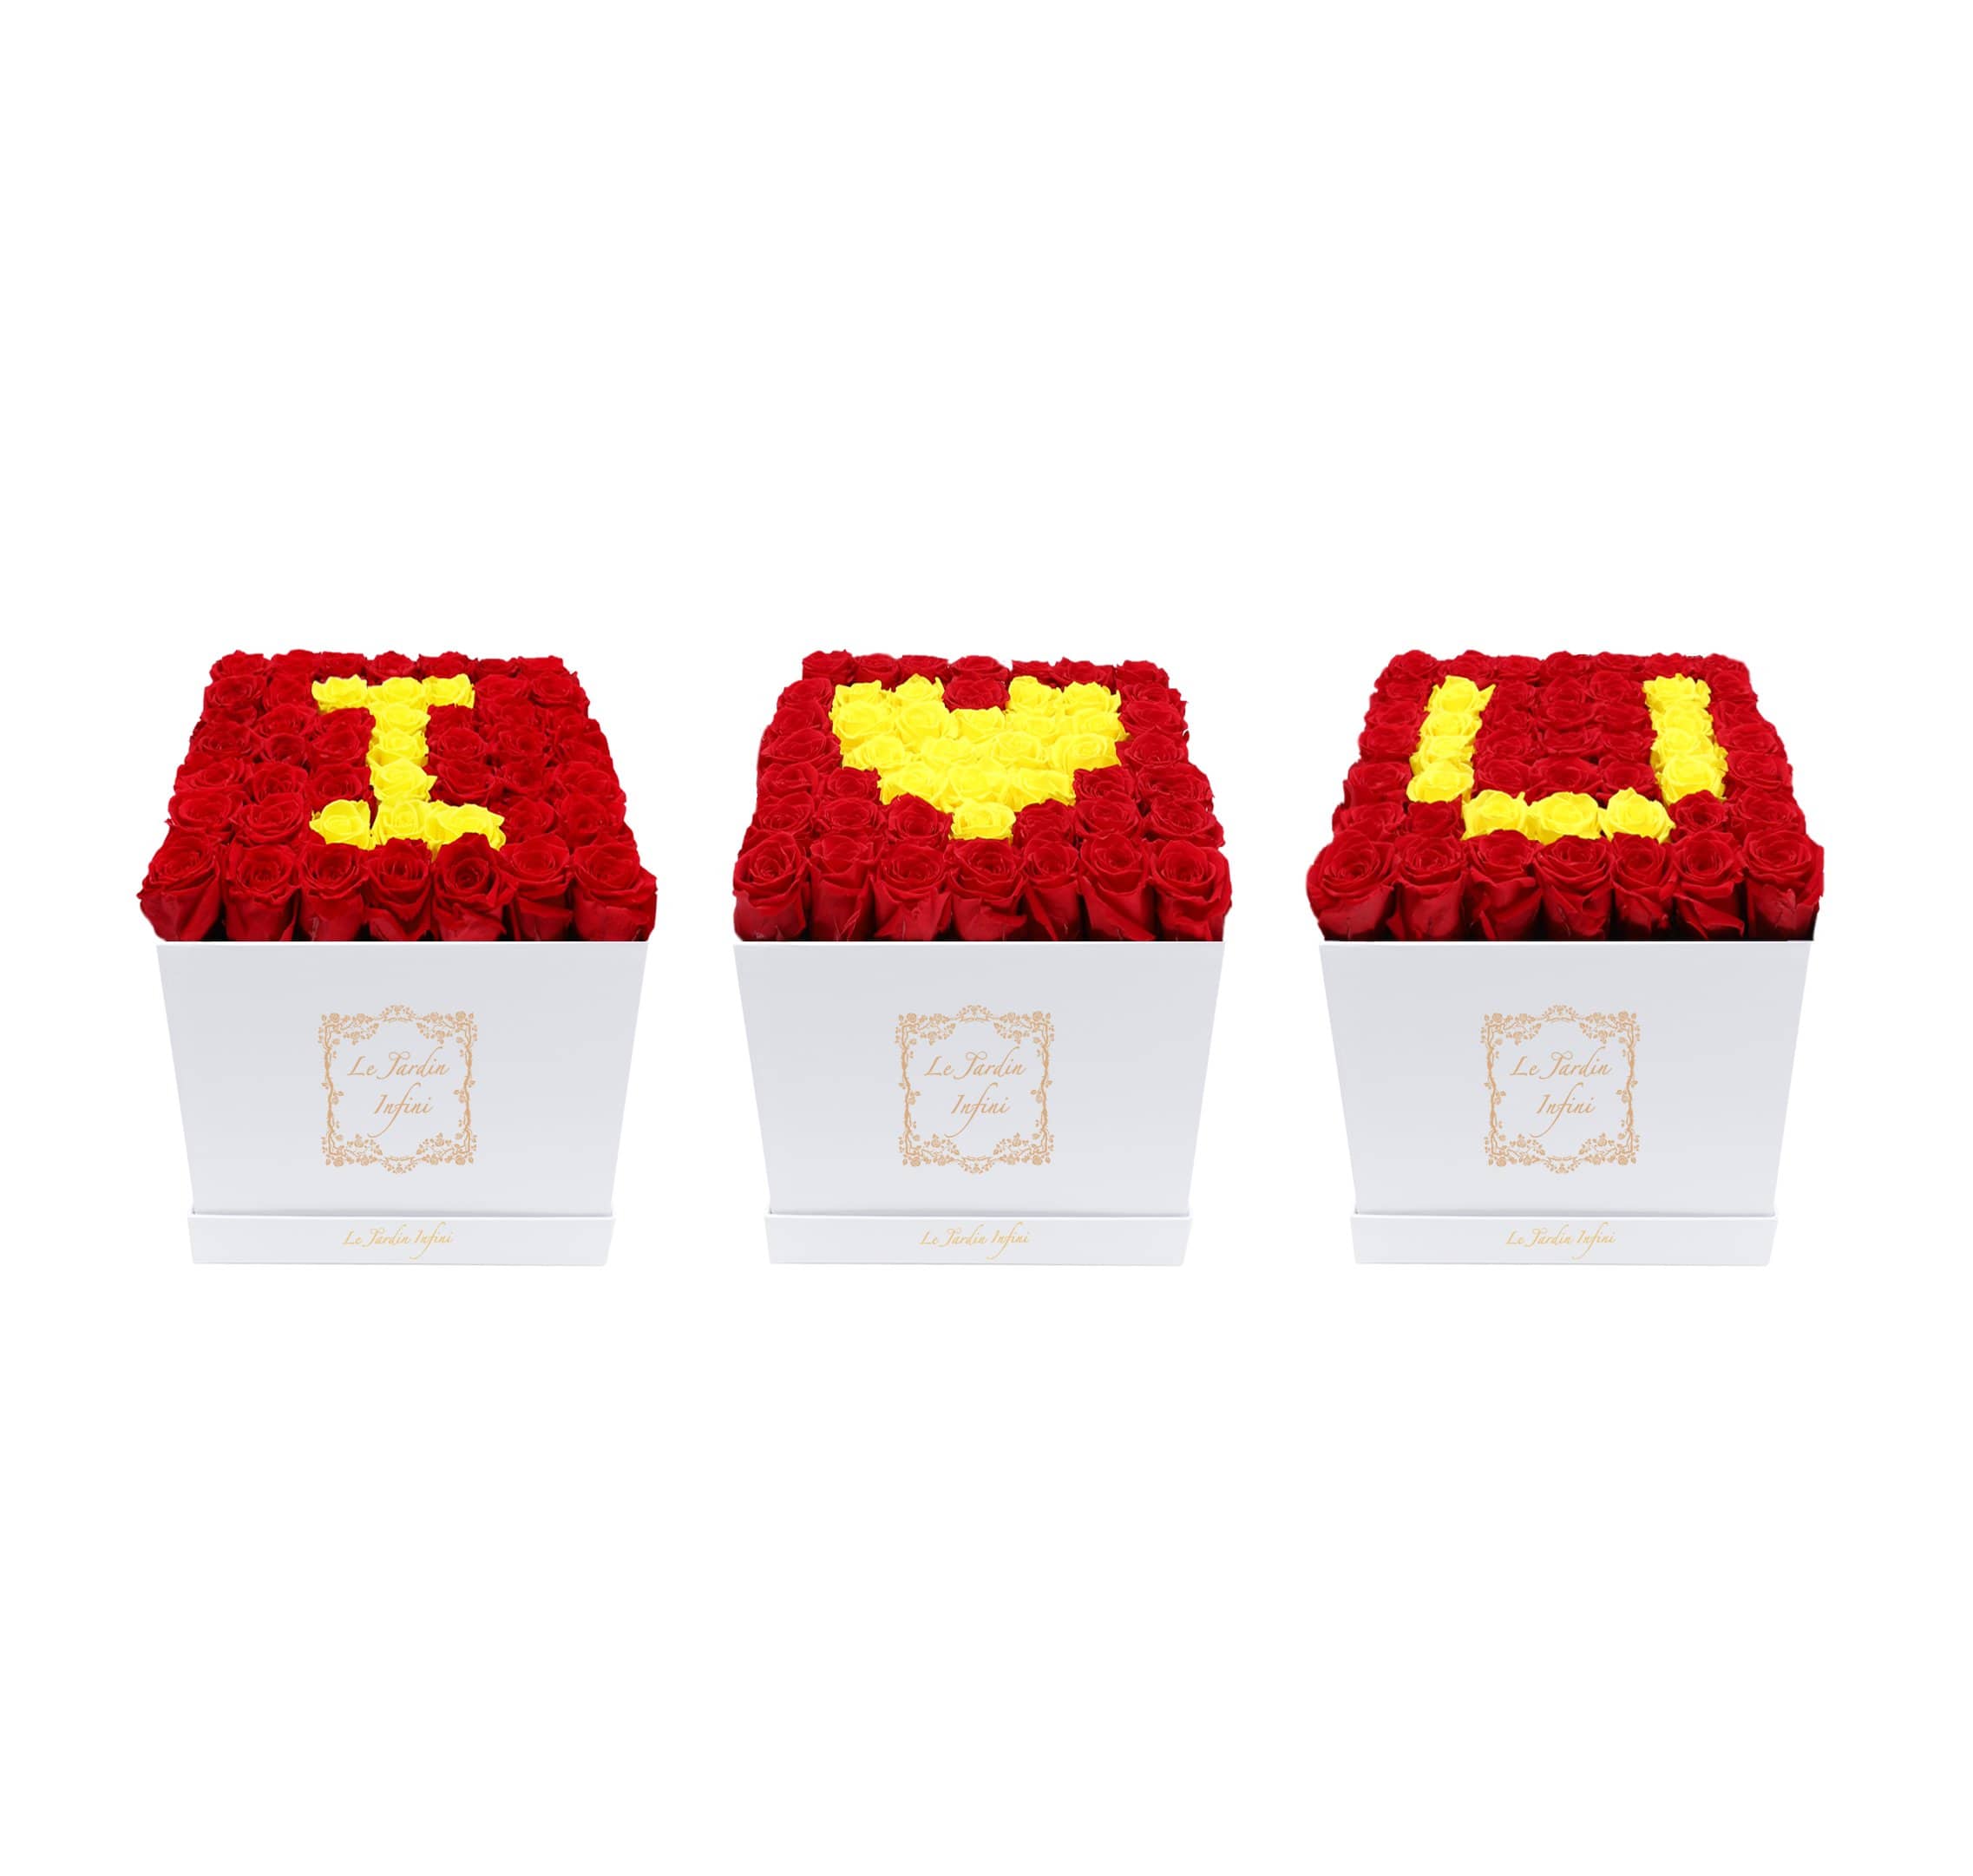 150 Roses I Love U Set Yellow & Red Preserved Roses - Large Square Luxury White Box